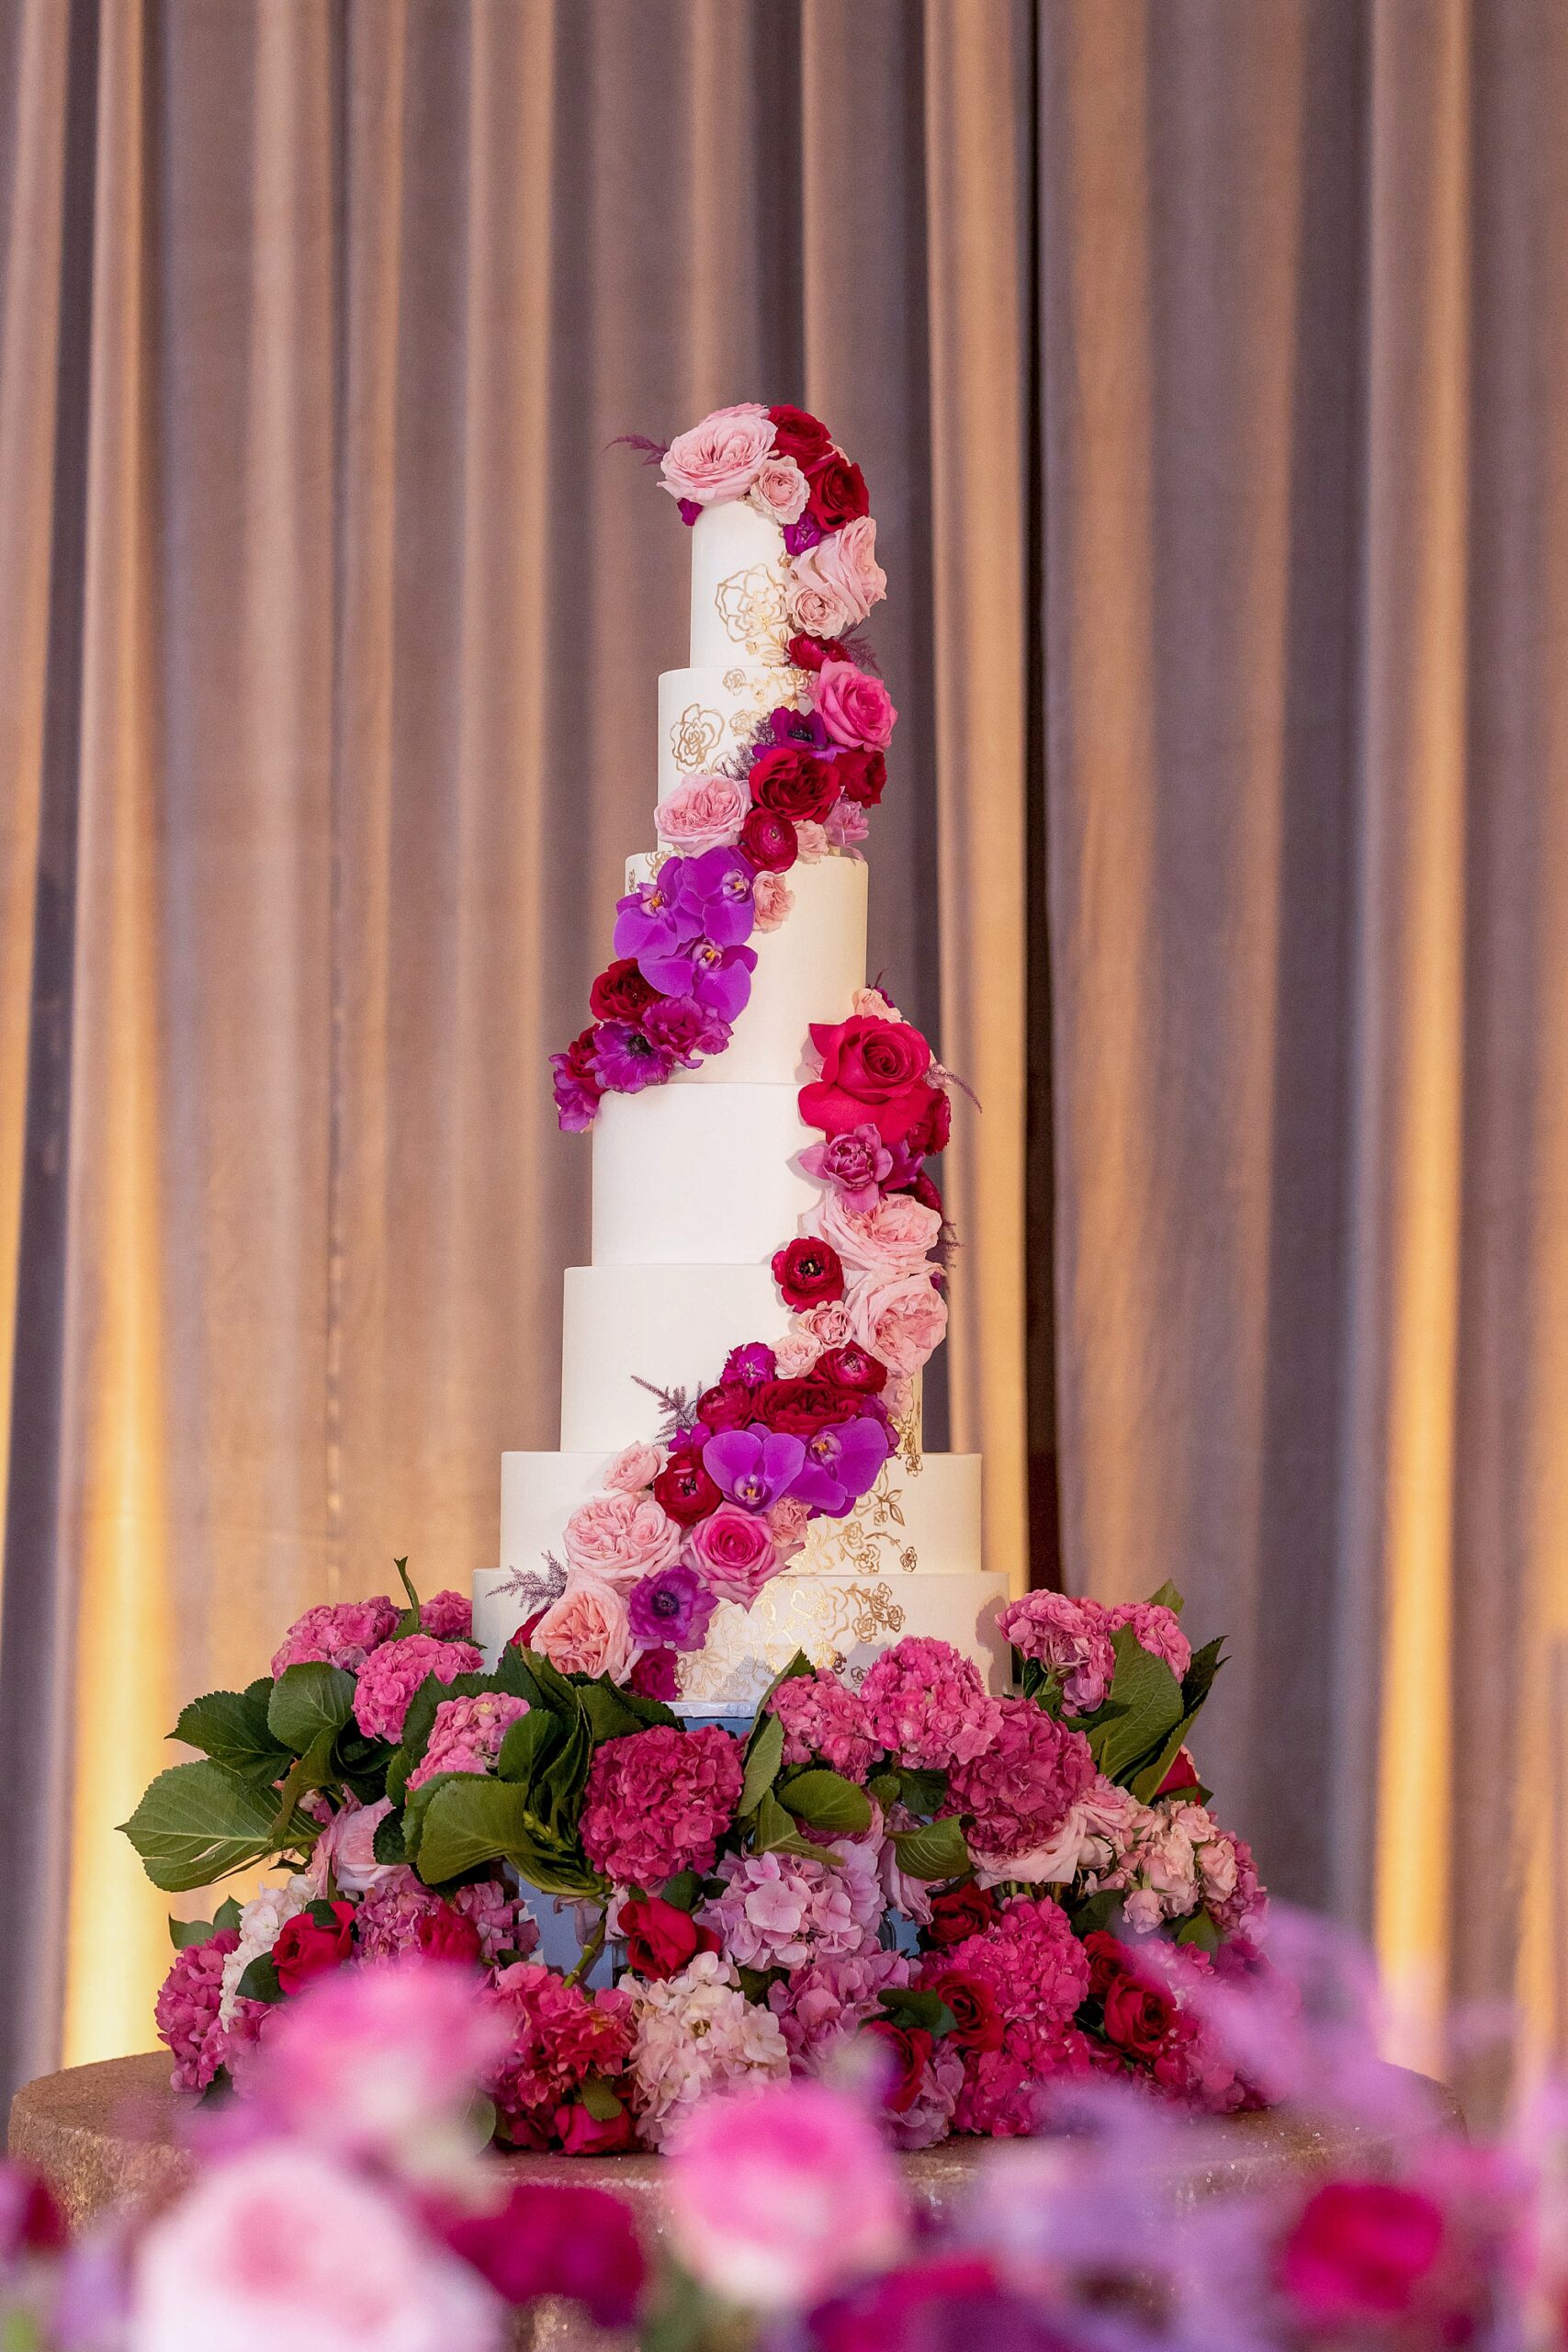 tiered wedding cake with pink flowers winding around tiers 